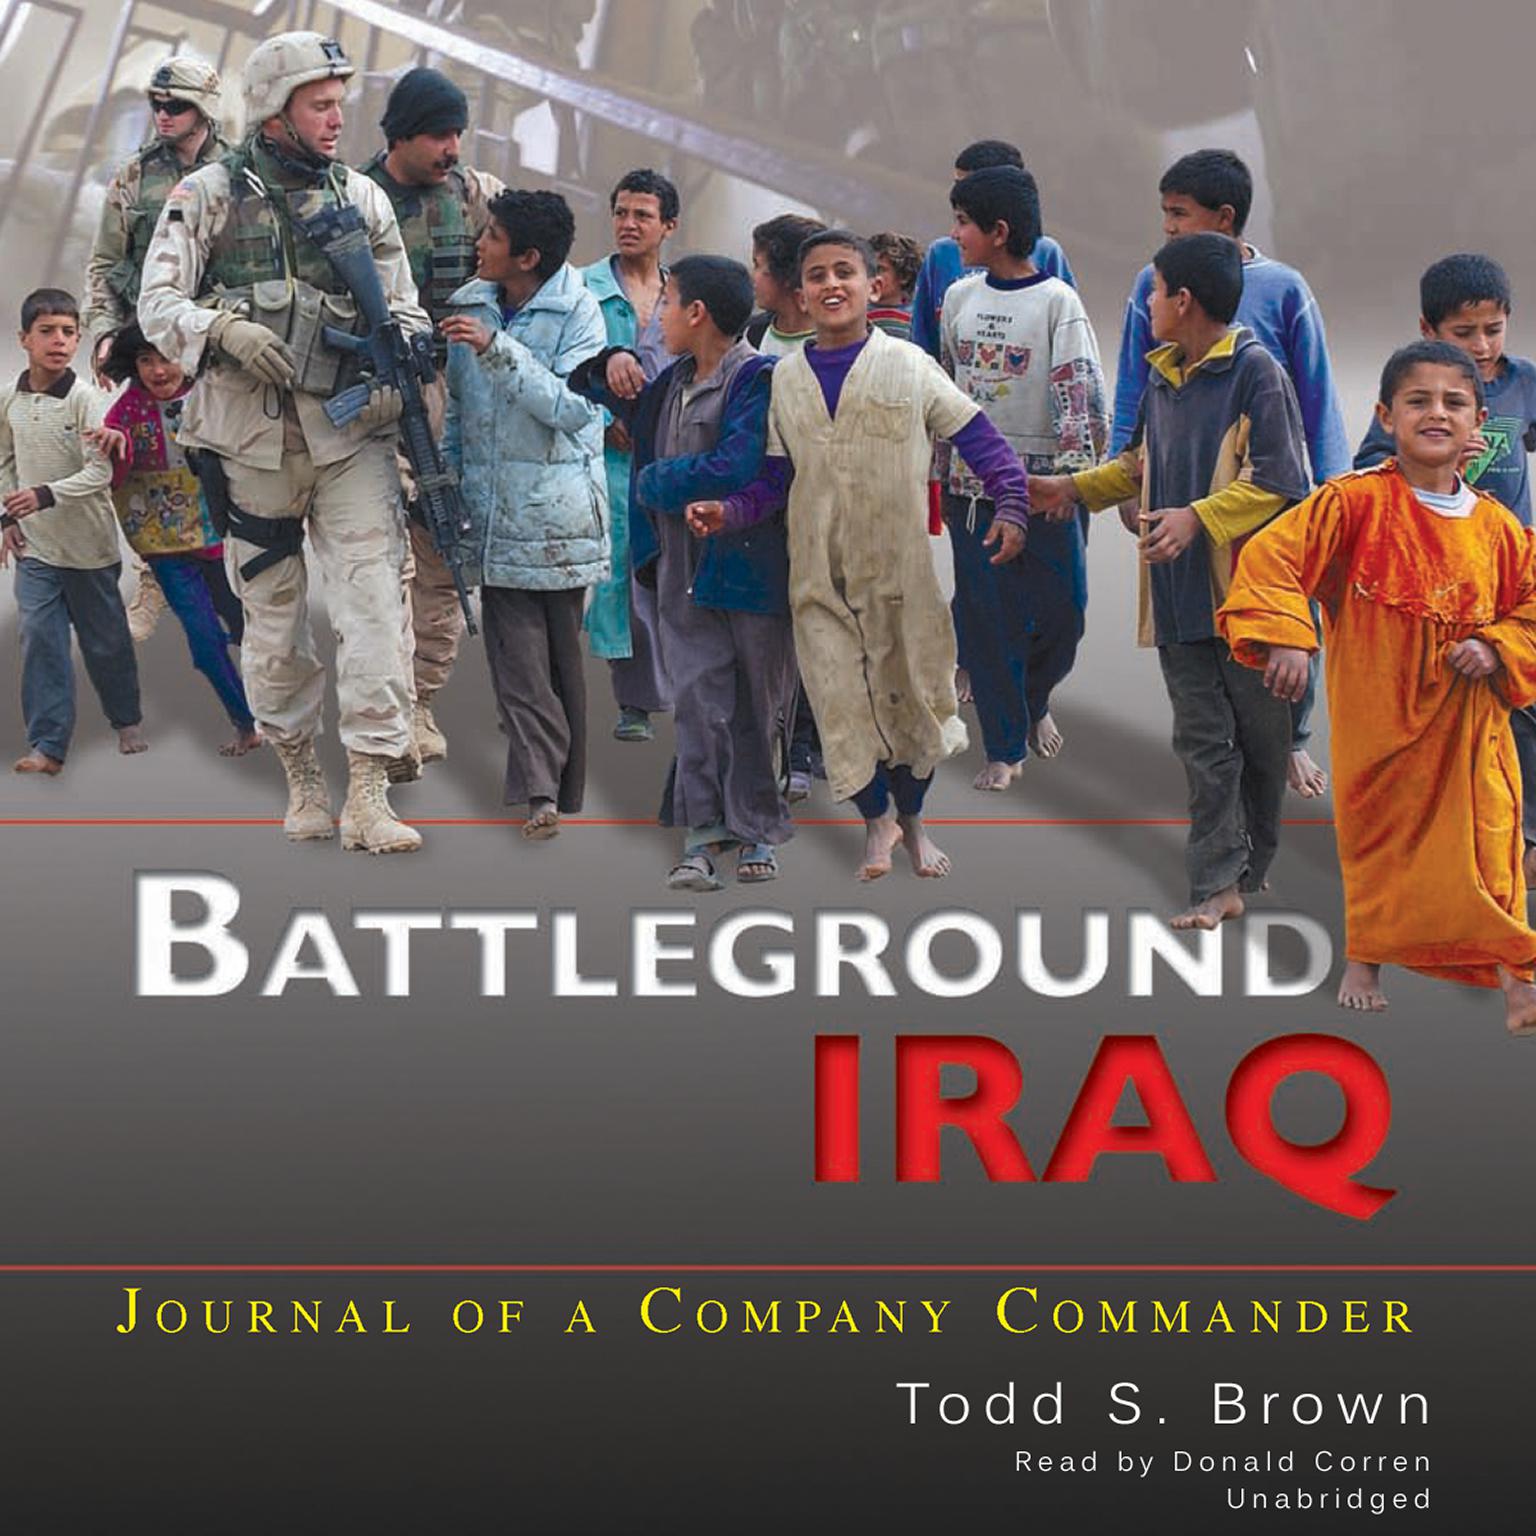 Battleground Iraq: Journal of a Company Commander Audiobook, by Todd S. Brown